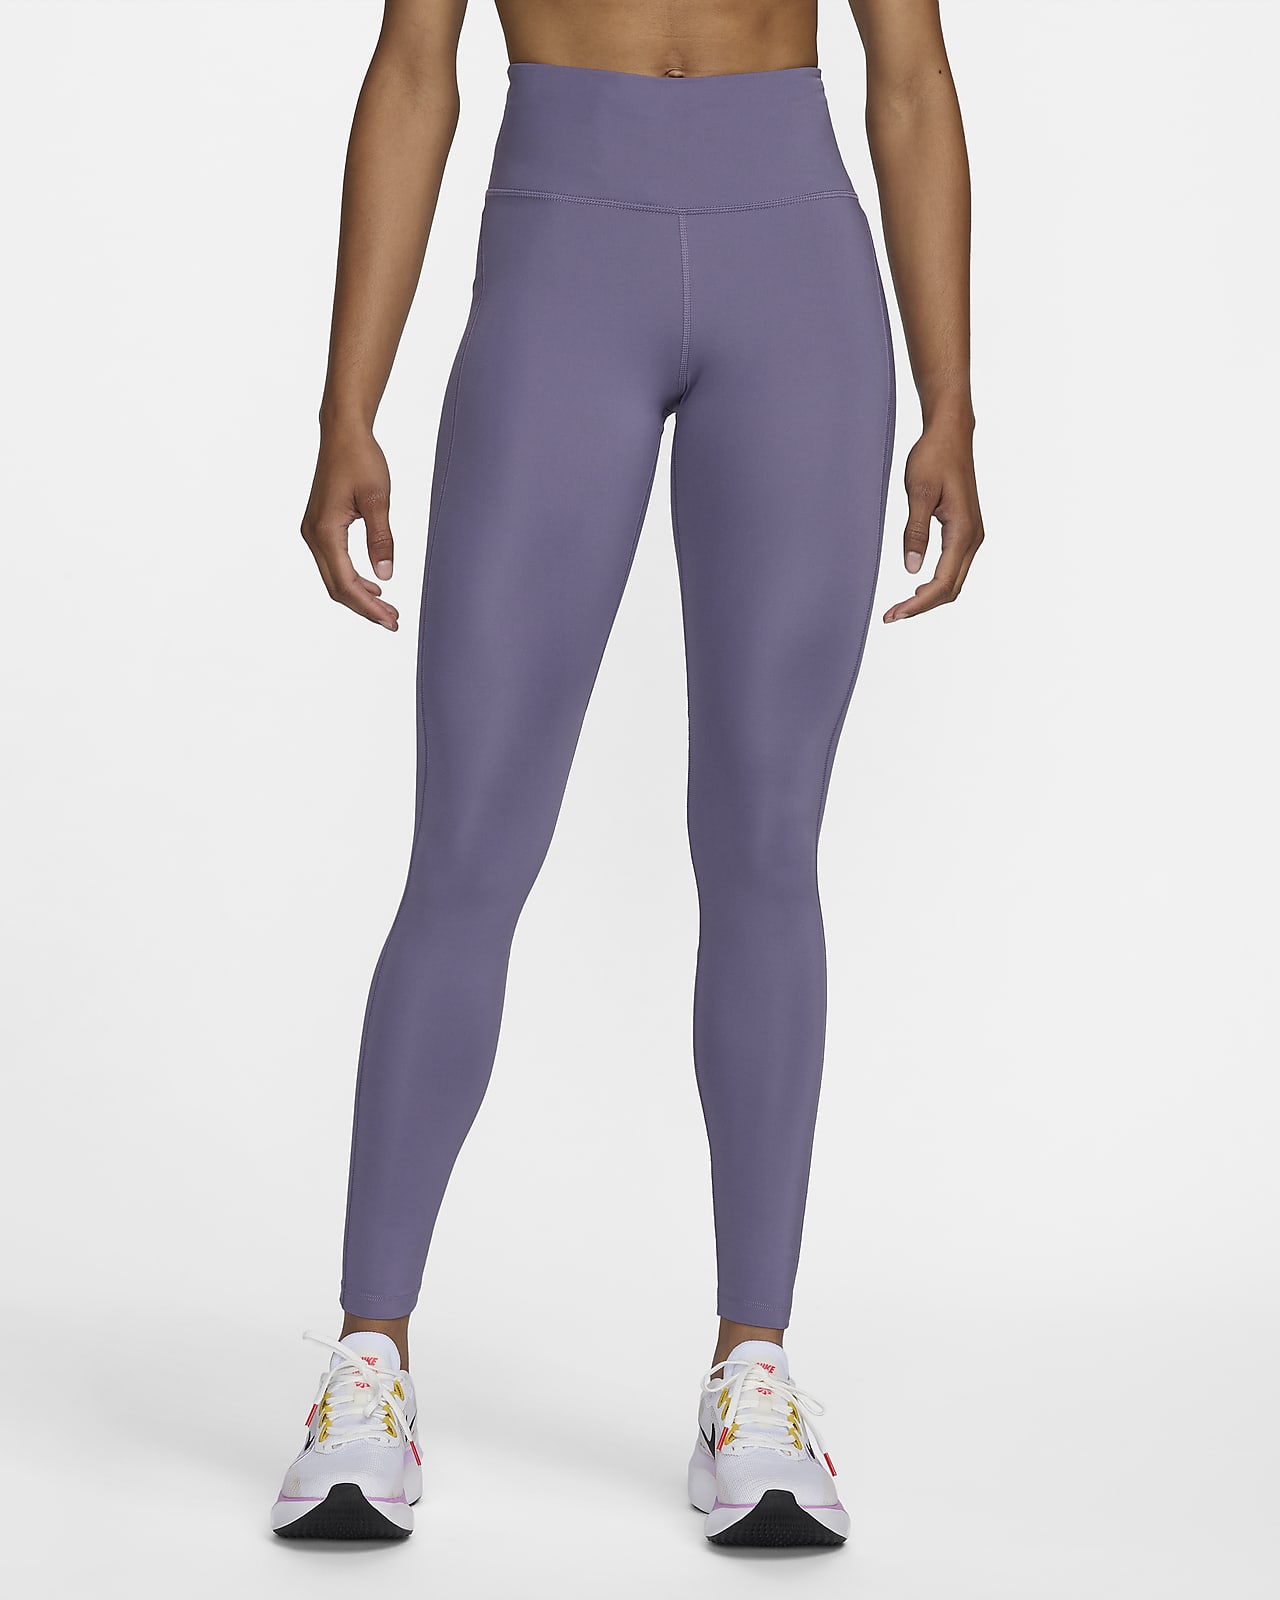 Nike, Epic Fast Women's Running Tights